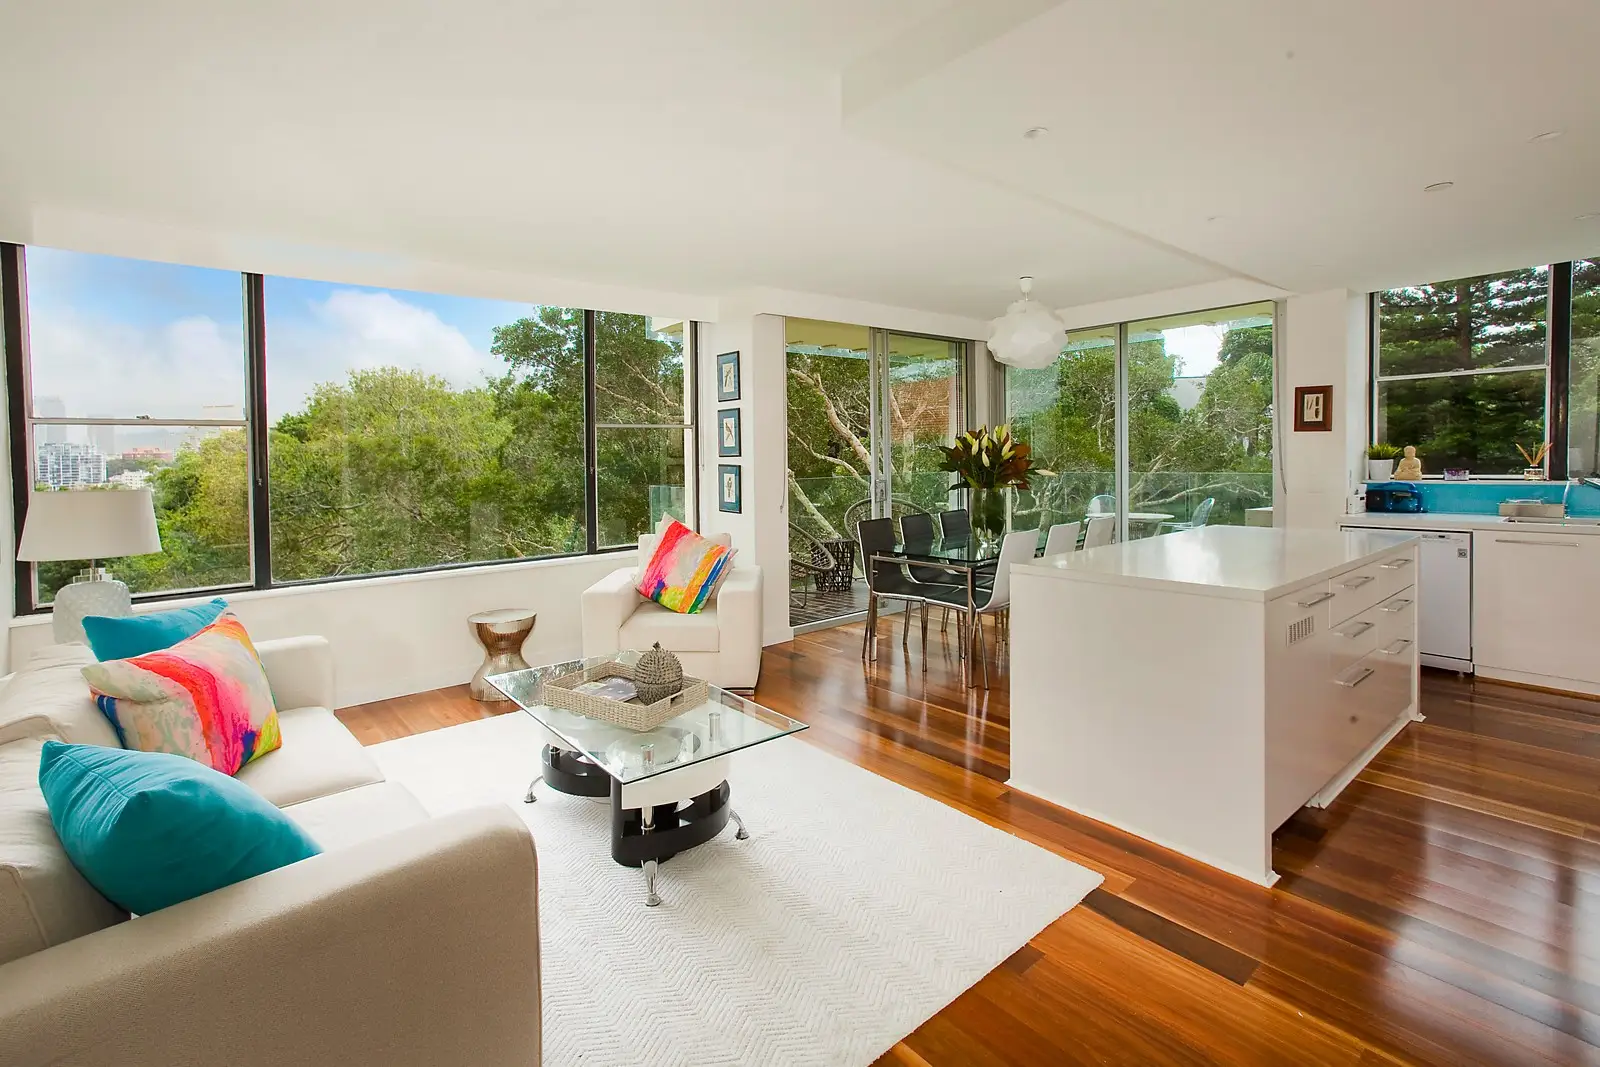 Photo #1: 3 Darling Point Road, Darling Point - For Sale by Sydney Sotheby's International Realty